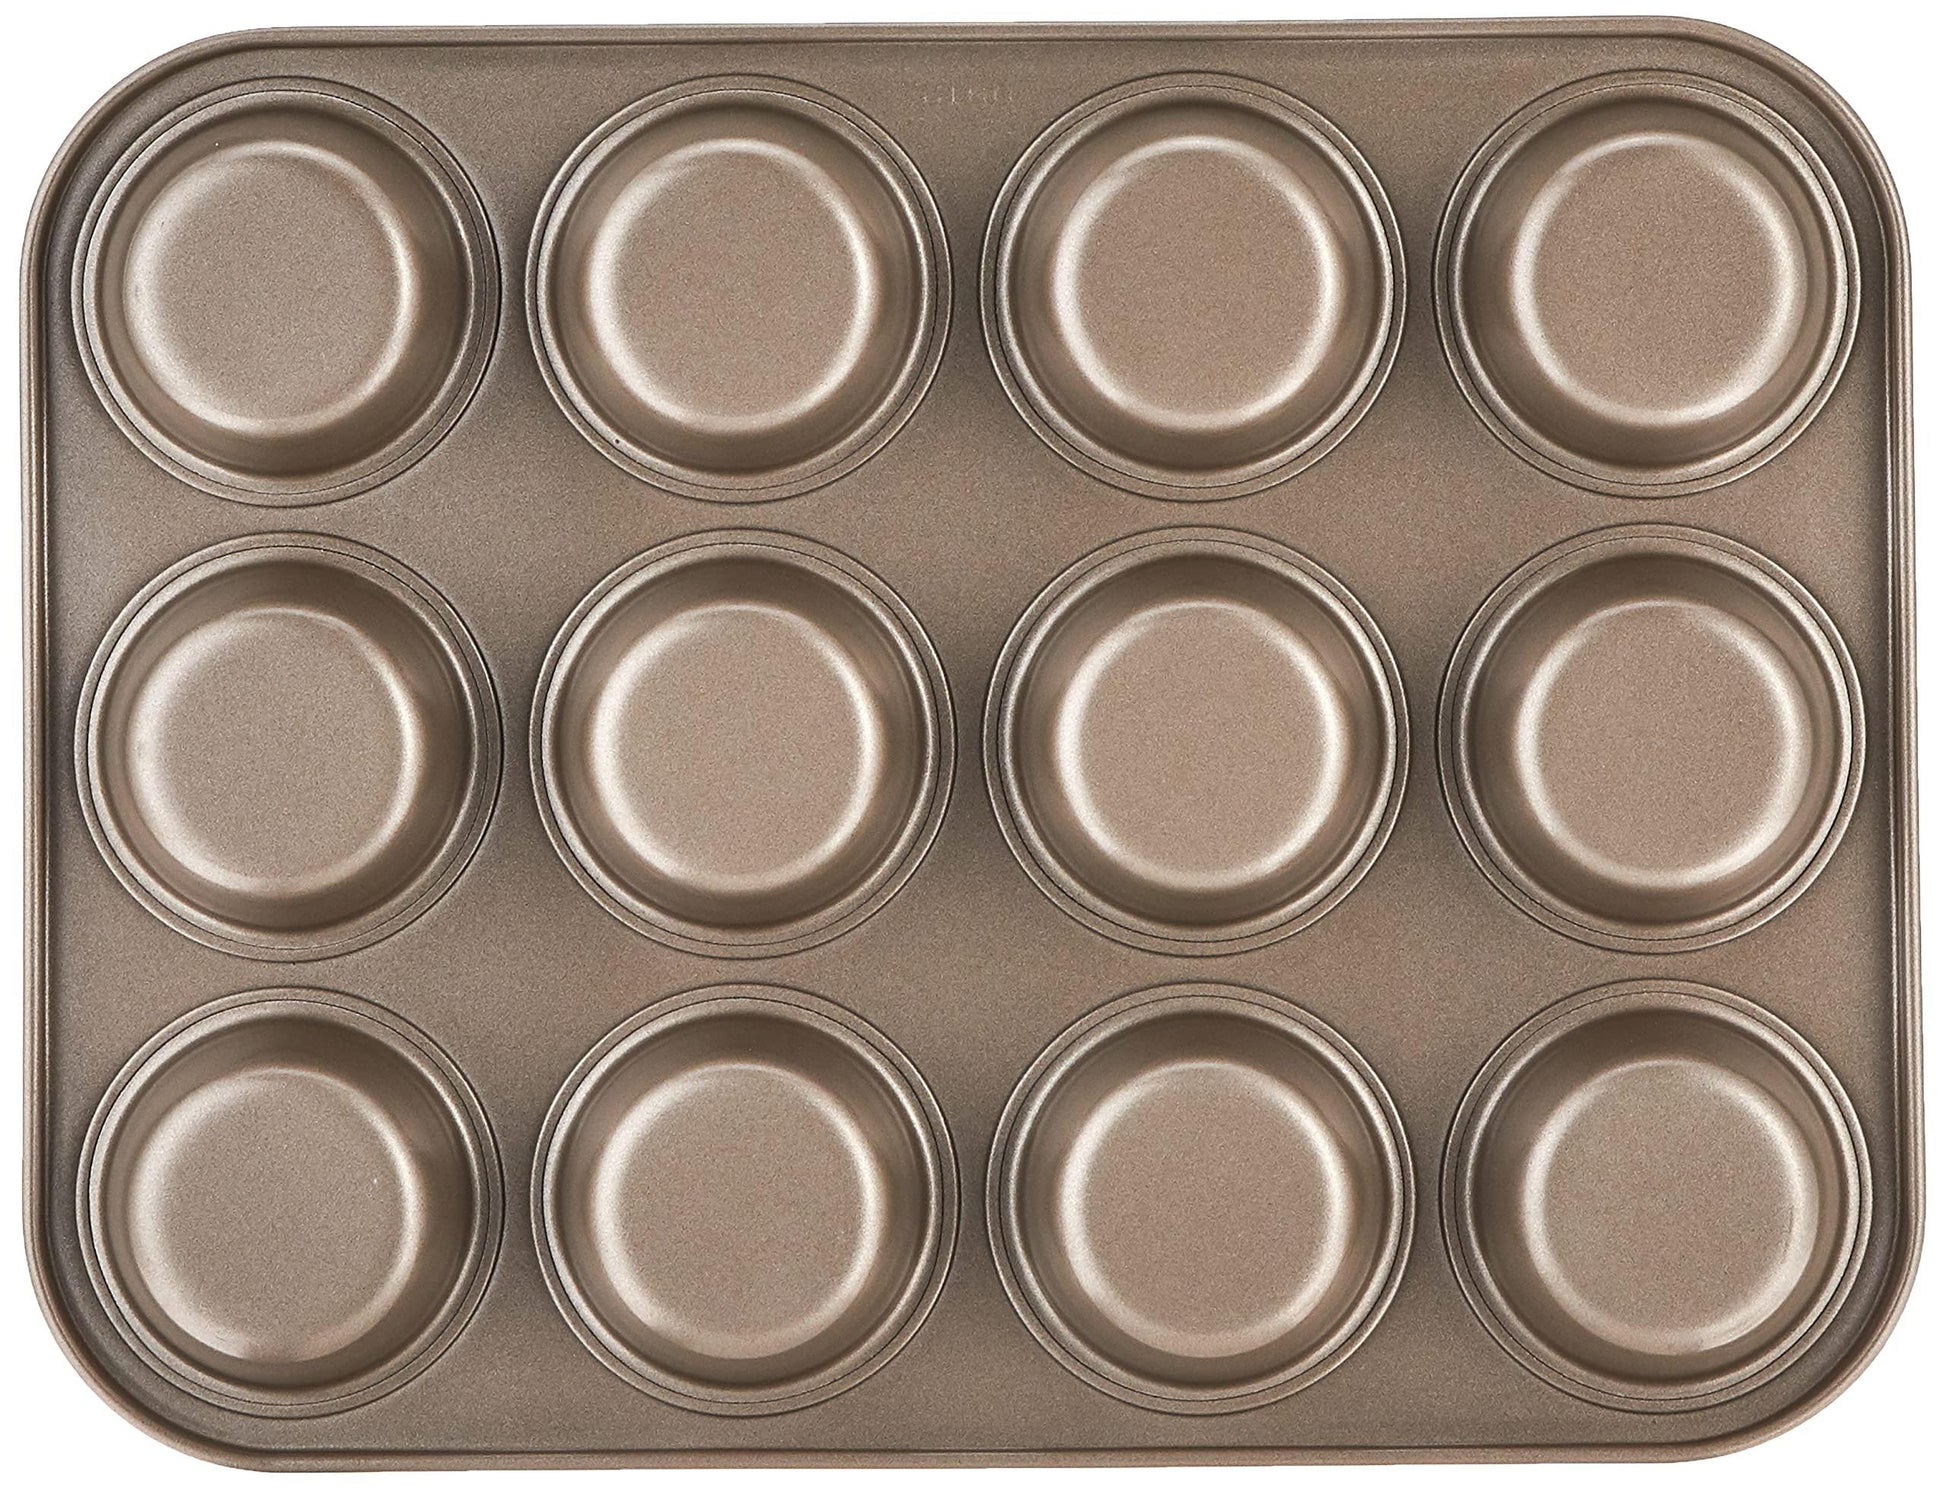 Cuisinart Chef's Classic Nonstick Bakeware 12-Cup Muffin Pan, Champagne - CookCave